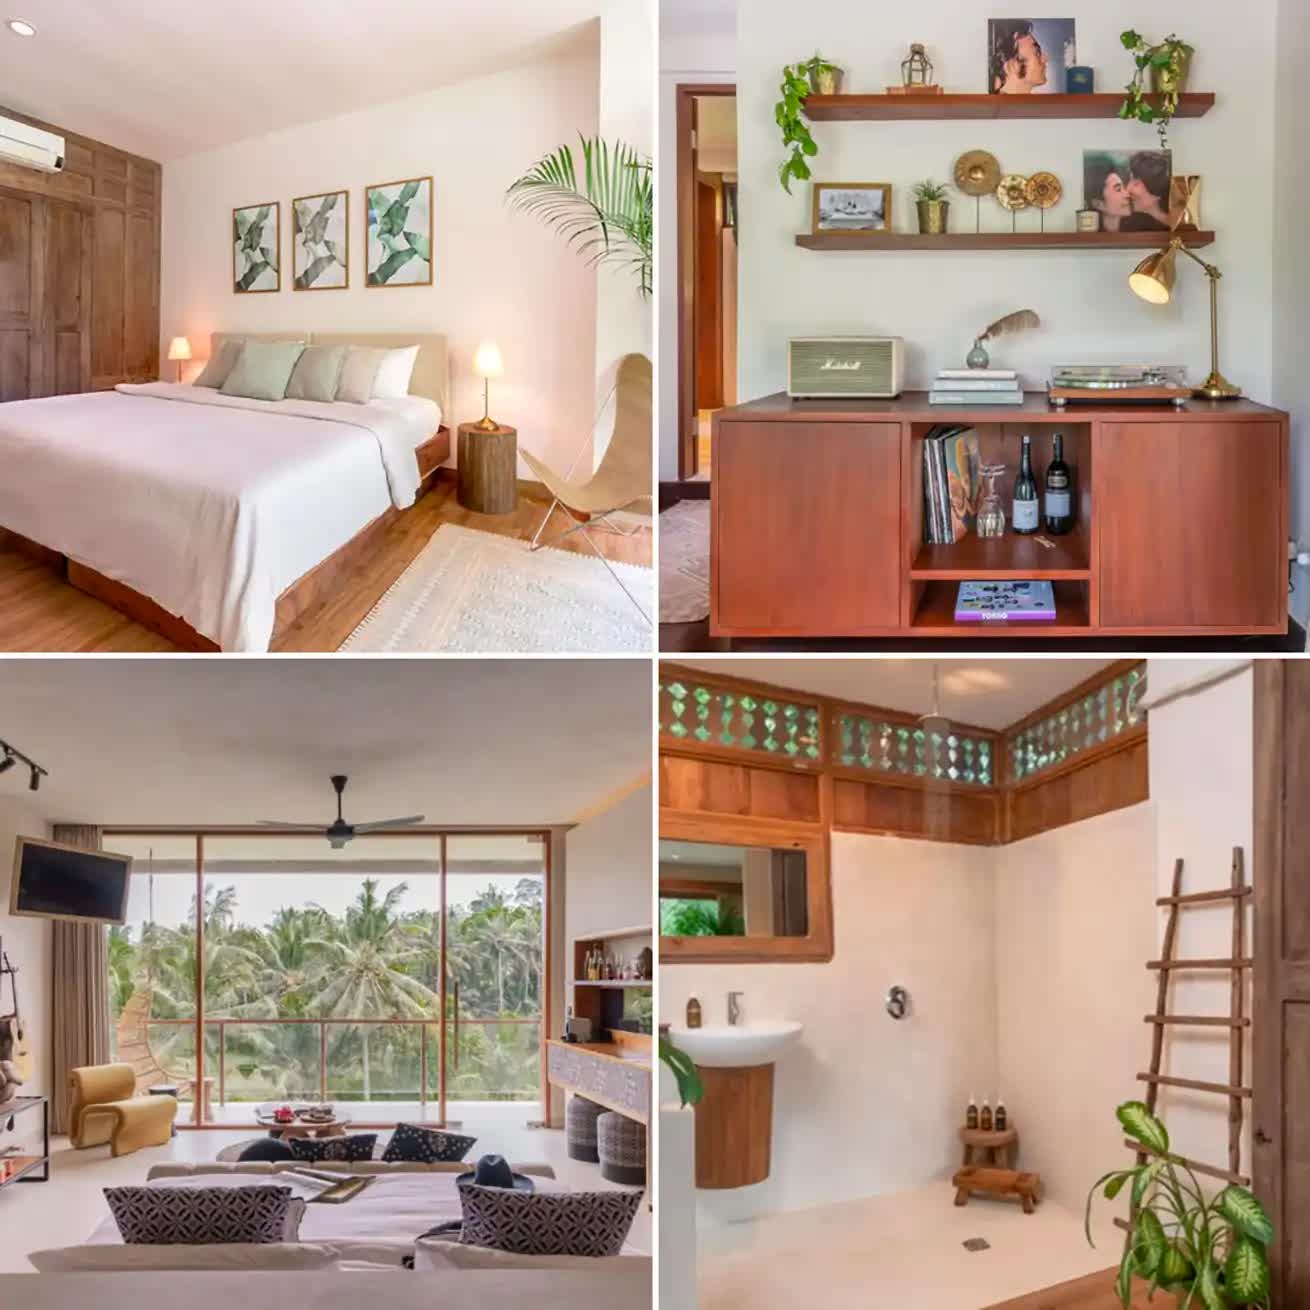 All kinds of room interiors in Soulshine Bali